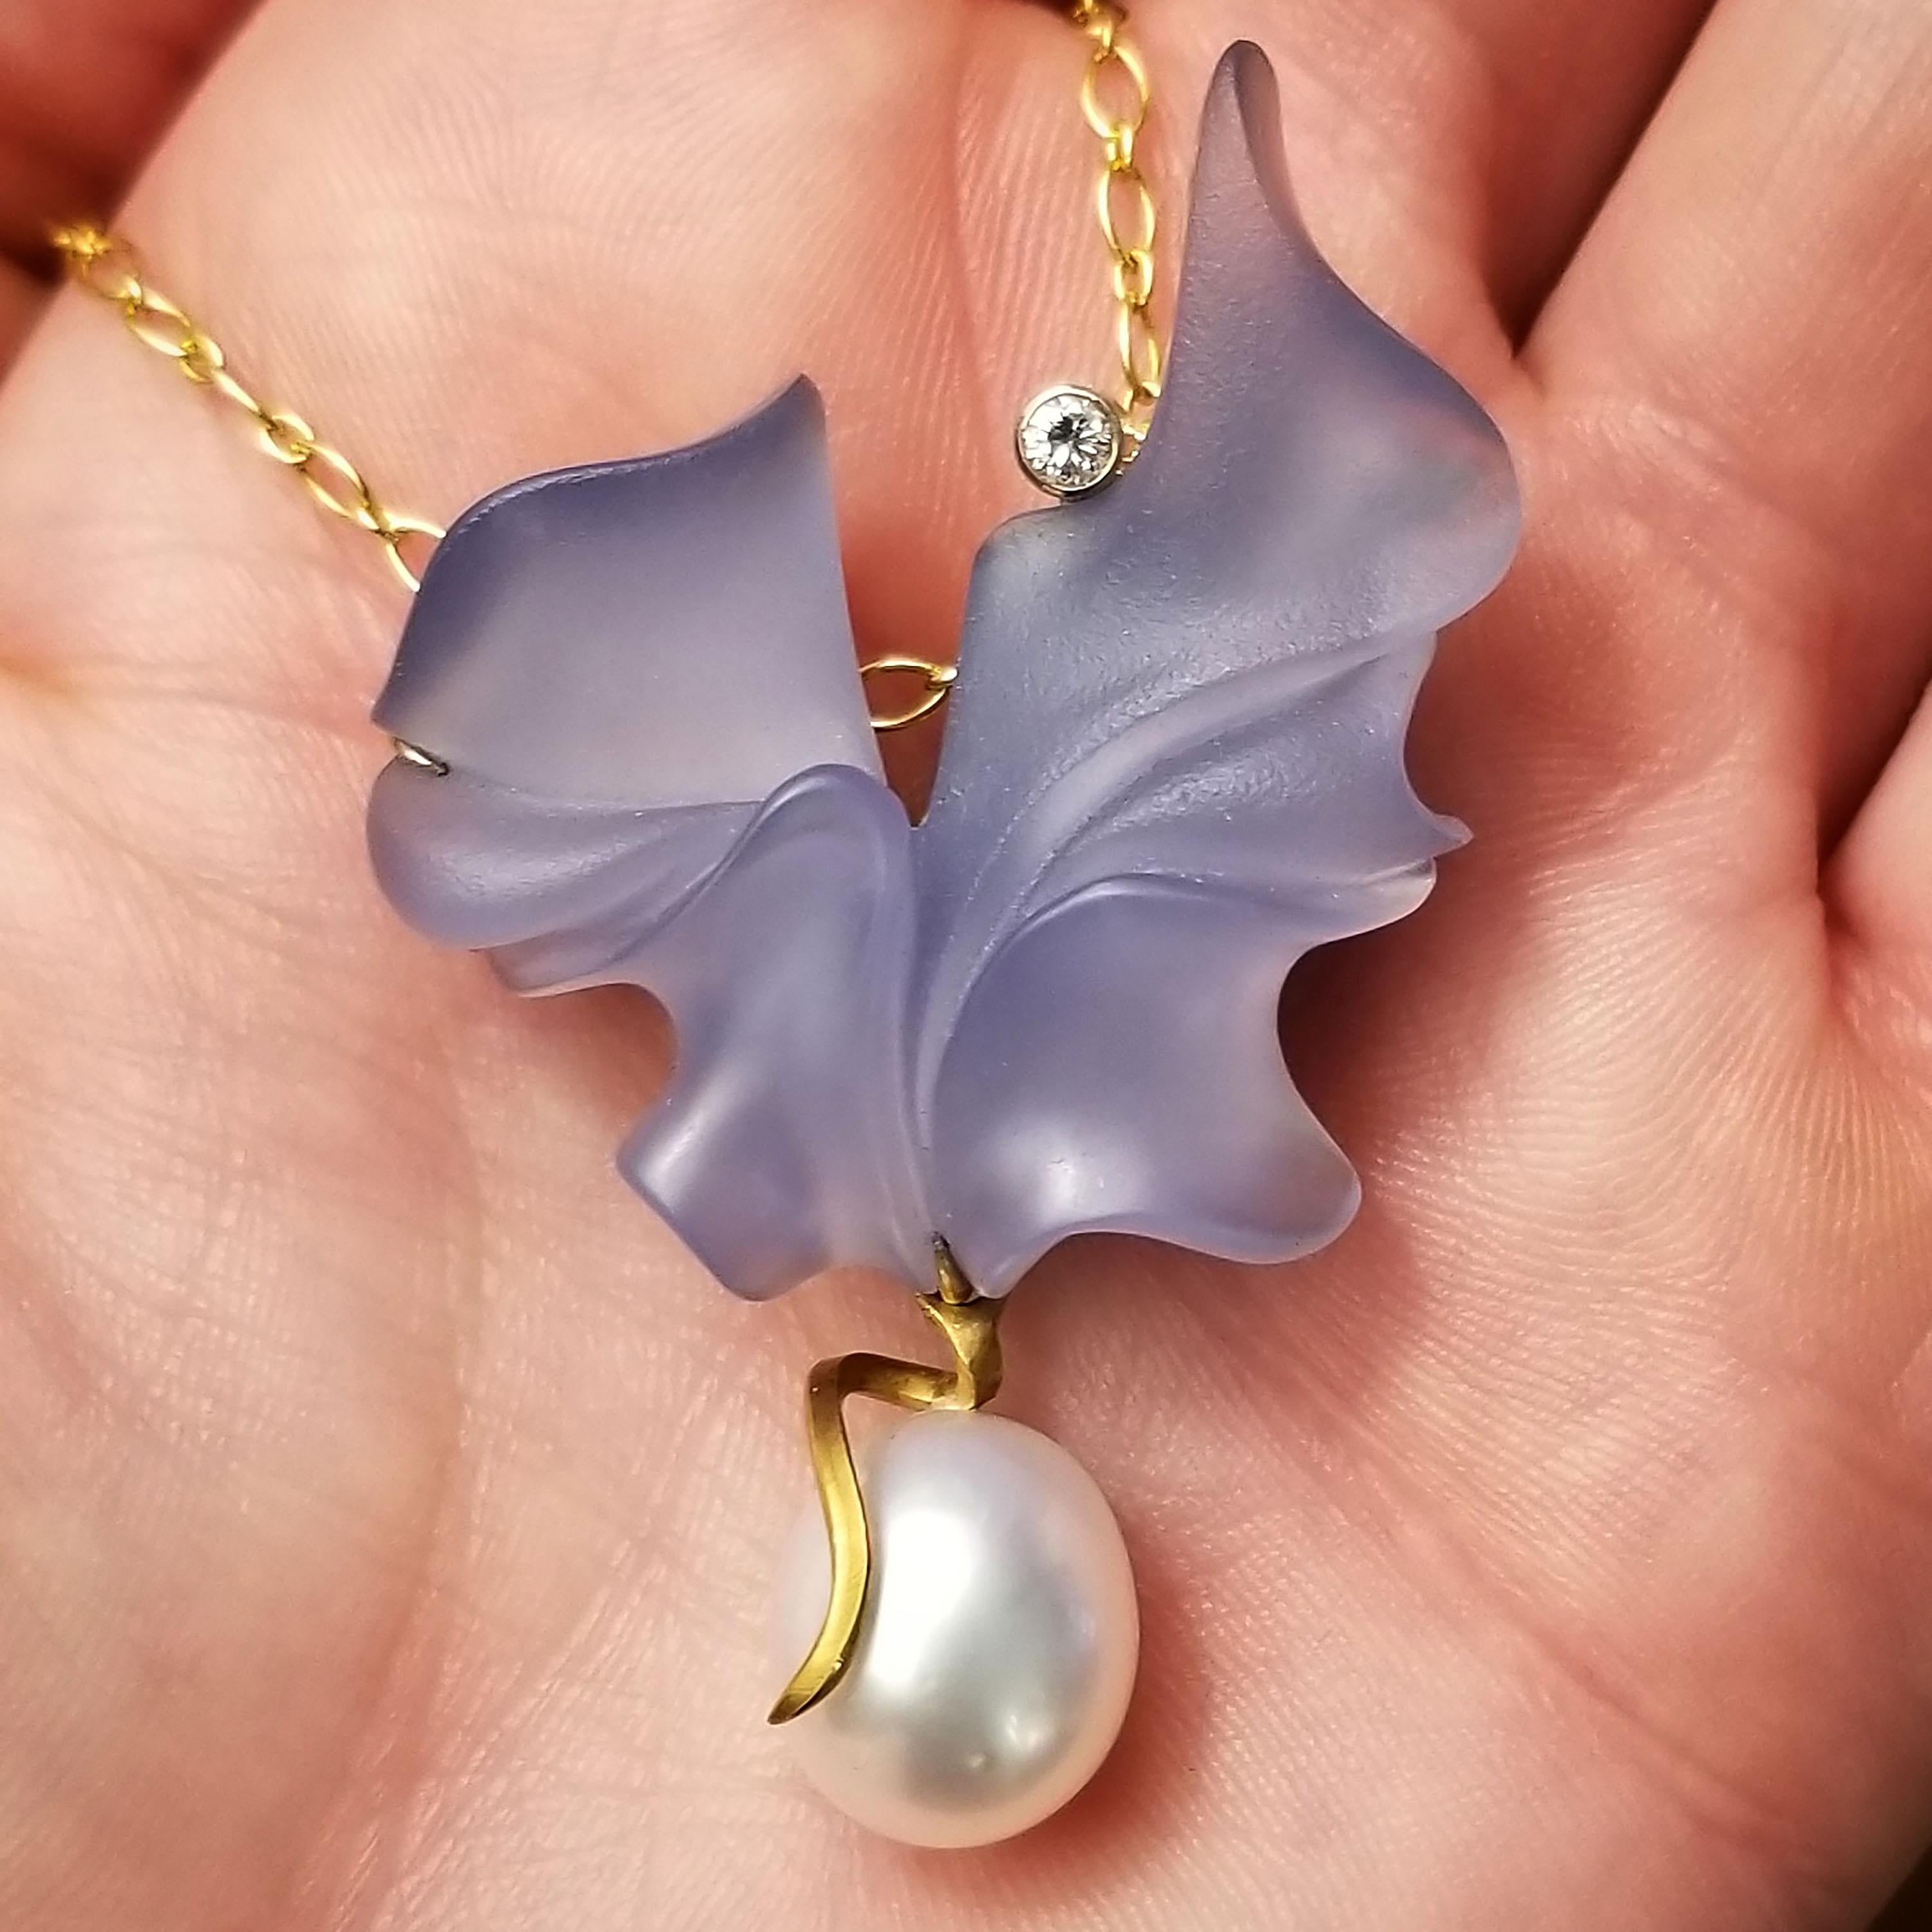 This piece is an elegant and wearable sculpture, bound to amaze all who see it in person.

The sensuous lines of this chalcedony carving by Steve Walters are the focus of this 18kt gold pendant, enhancer, and brooch. The balance and deftness with